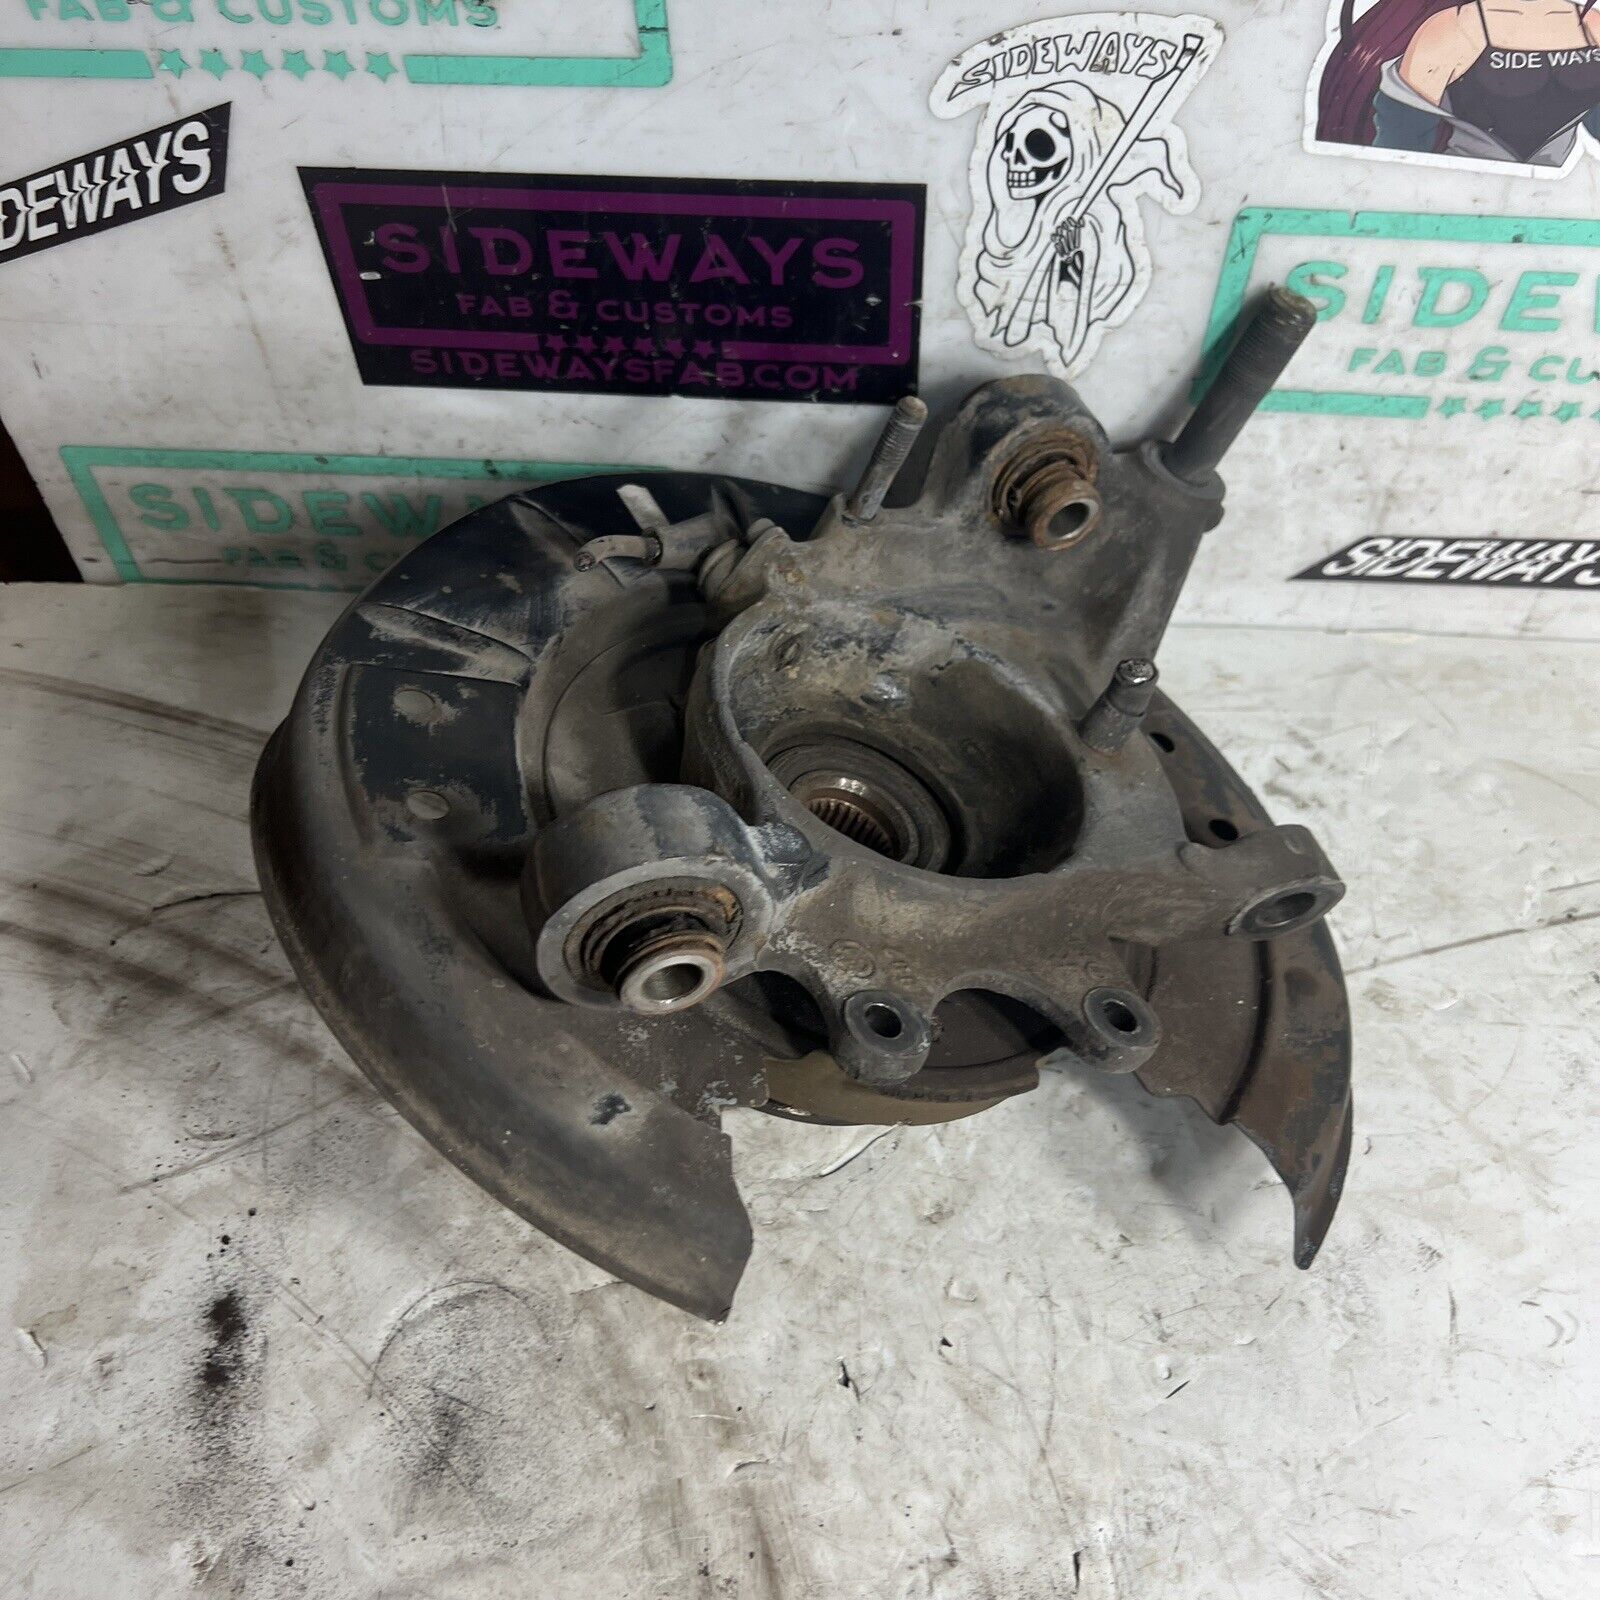 BMW E31 850i Rear Right Suspension Upright 840i Hub Spindle Knuckle